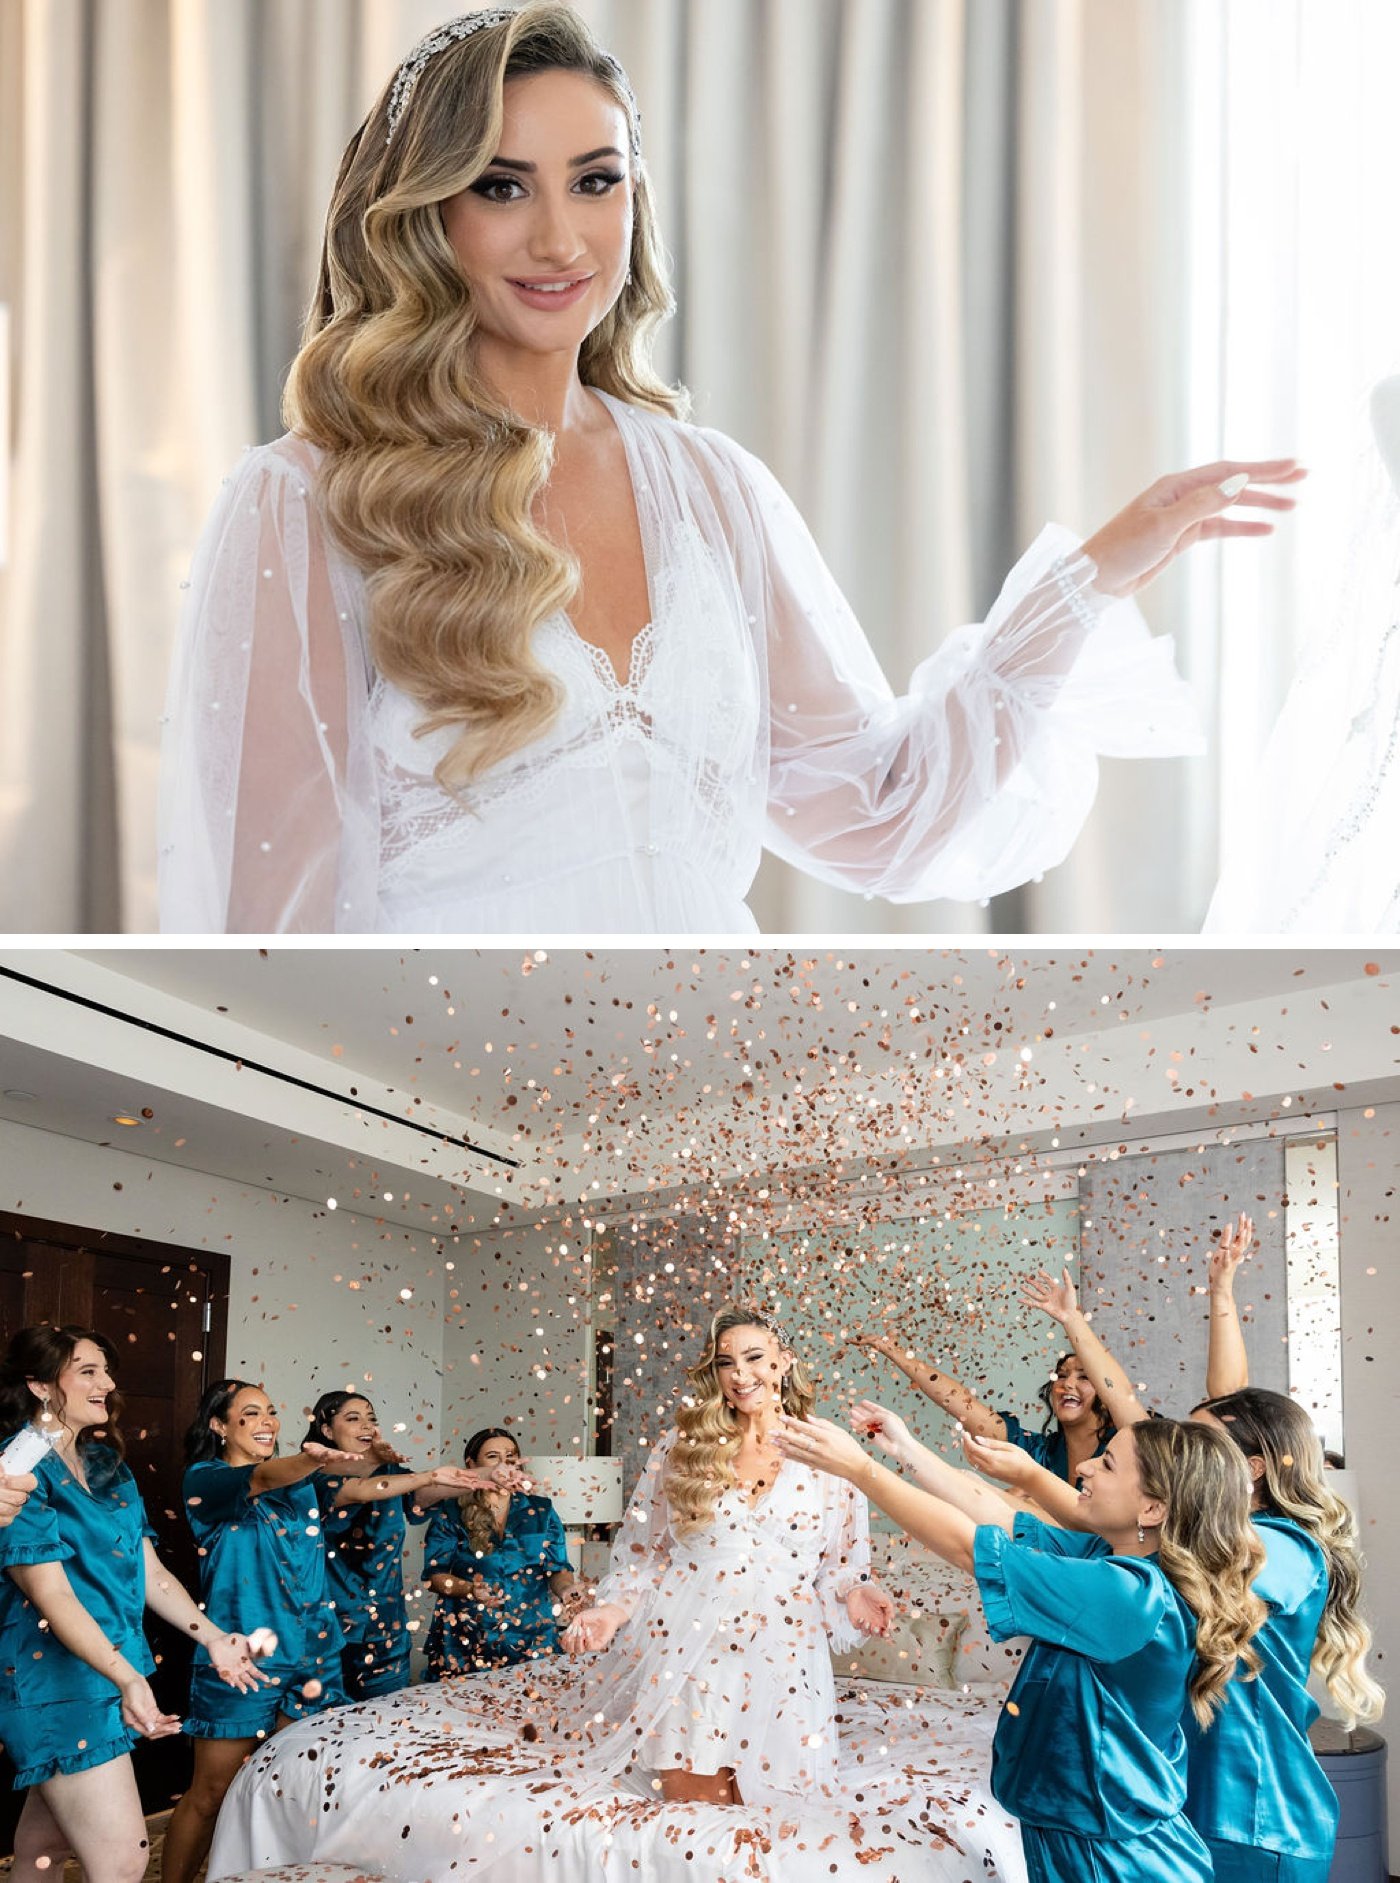 Bridesmaids showering confetti on the bride while getting ready